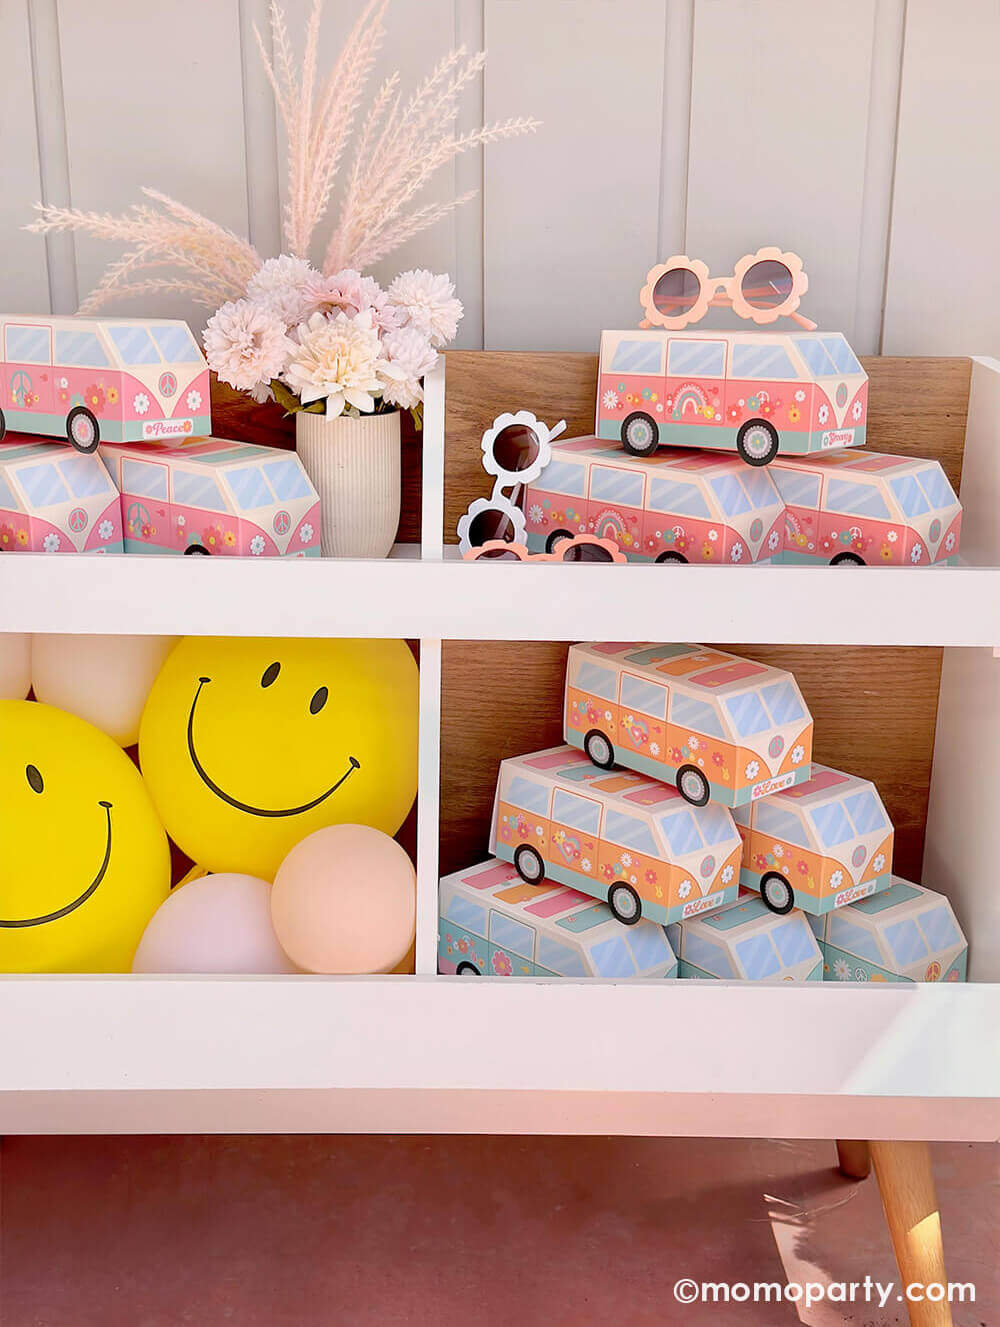 A book shelf filled with hippie themed VW van shaped treat boxes in pink and orange, along with Momo Party's yellow smiley face latex balloons at a baby girl's "Groovy One" themed first birthday party.